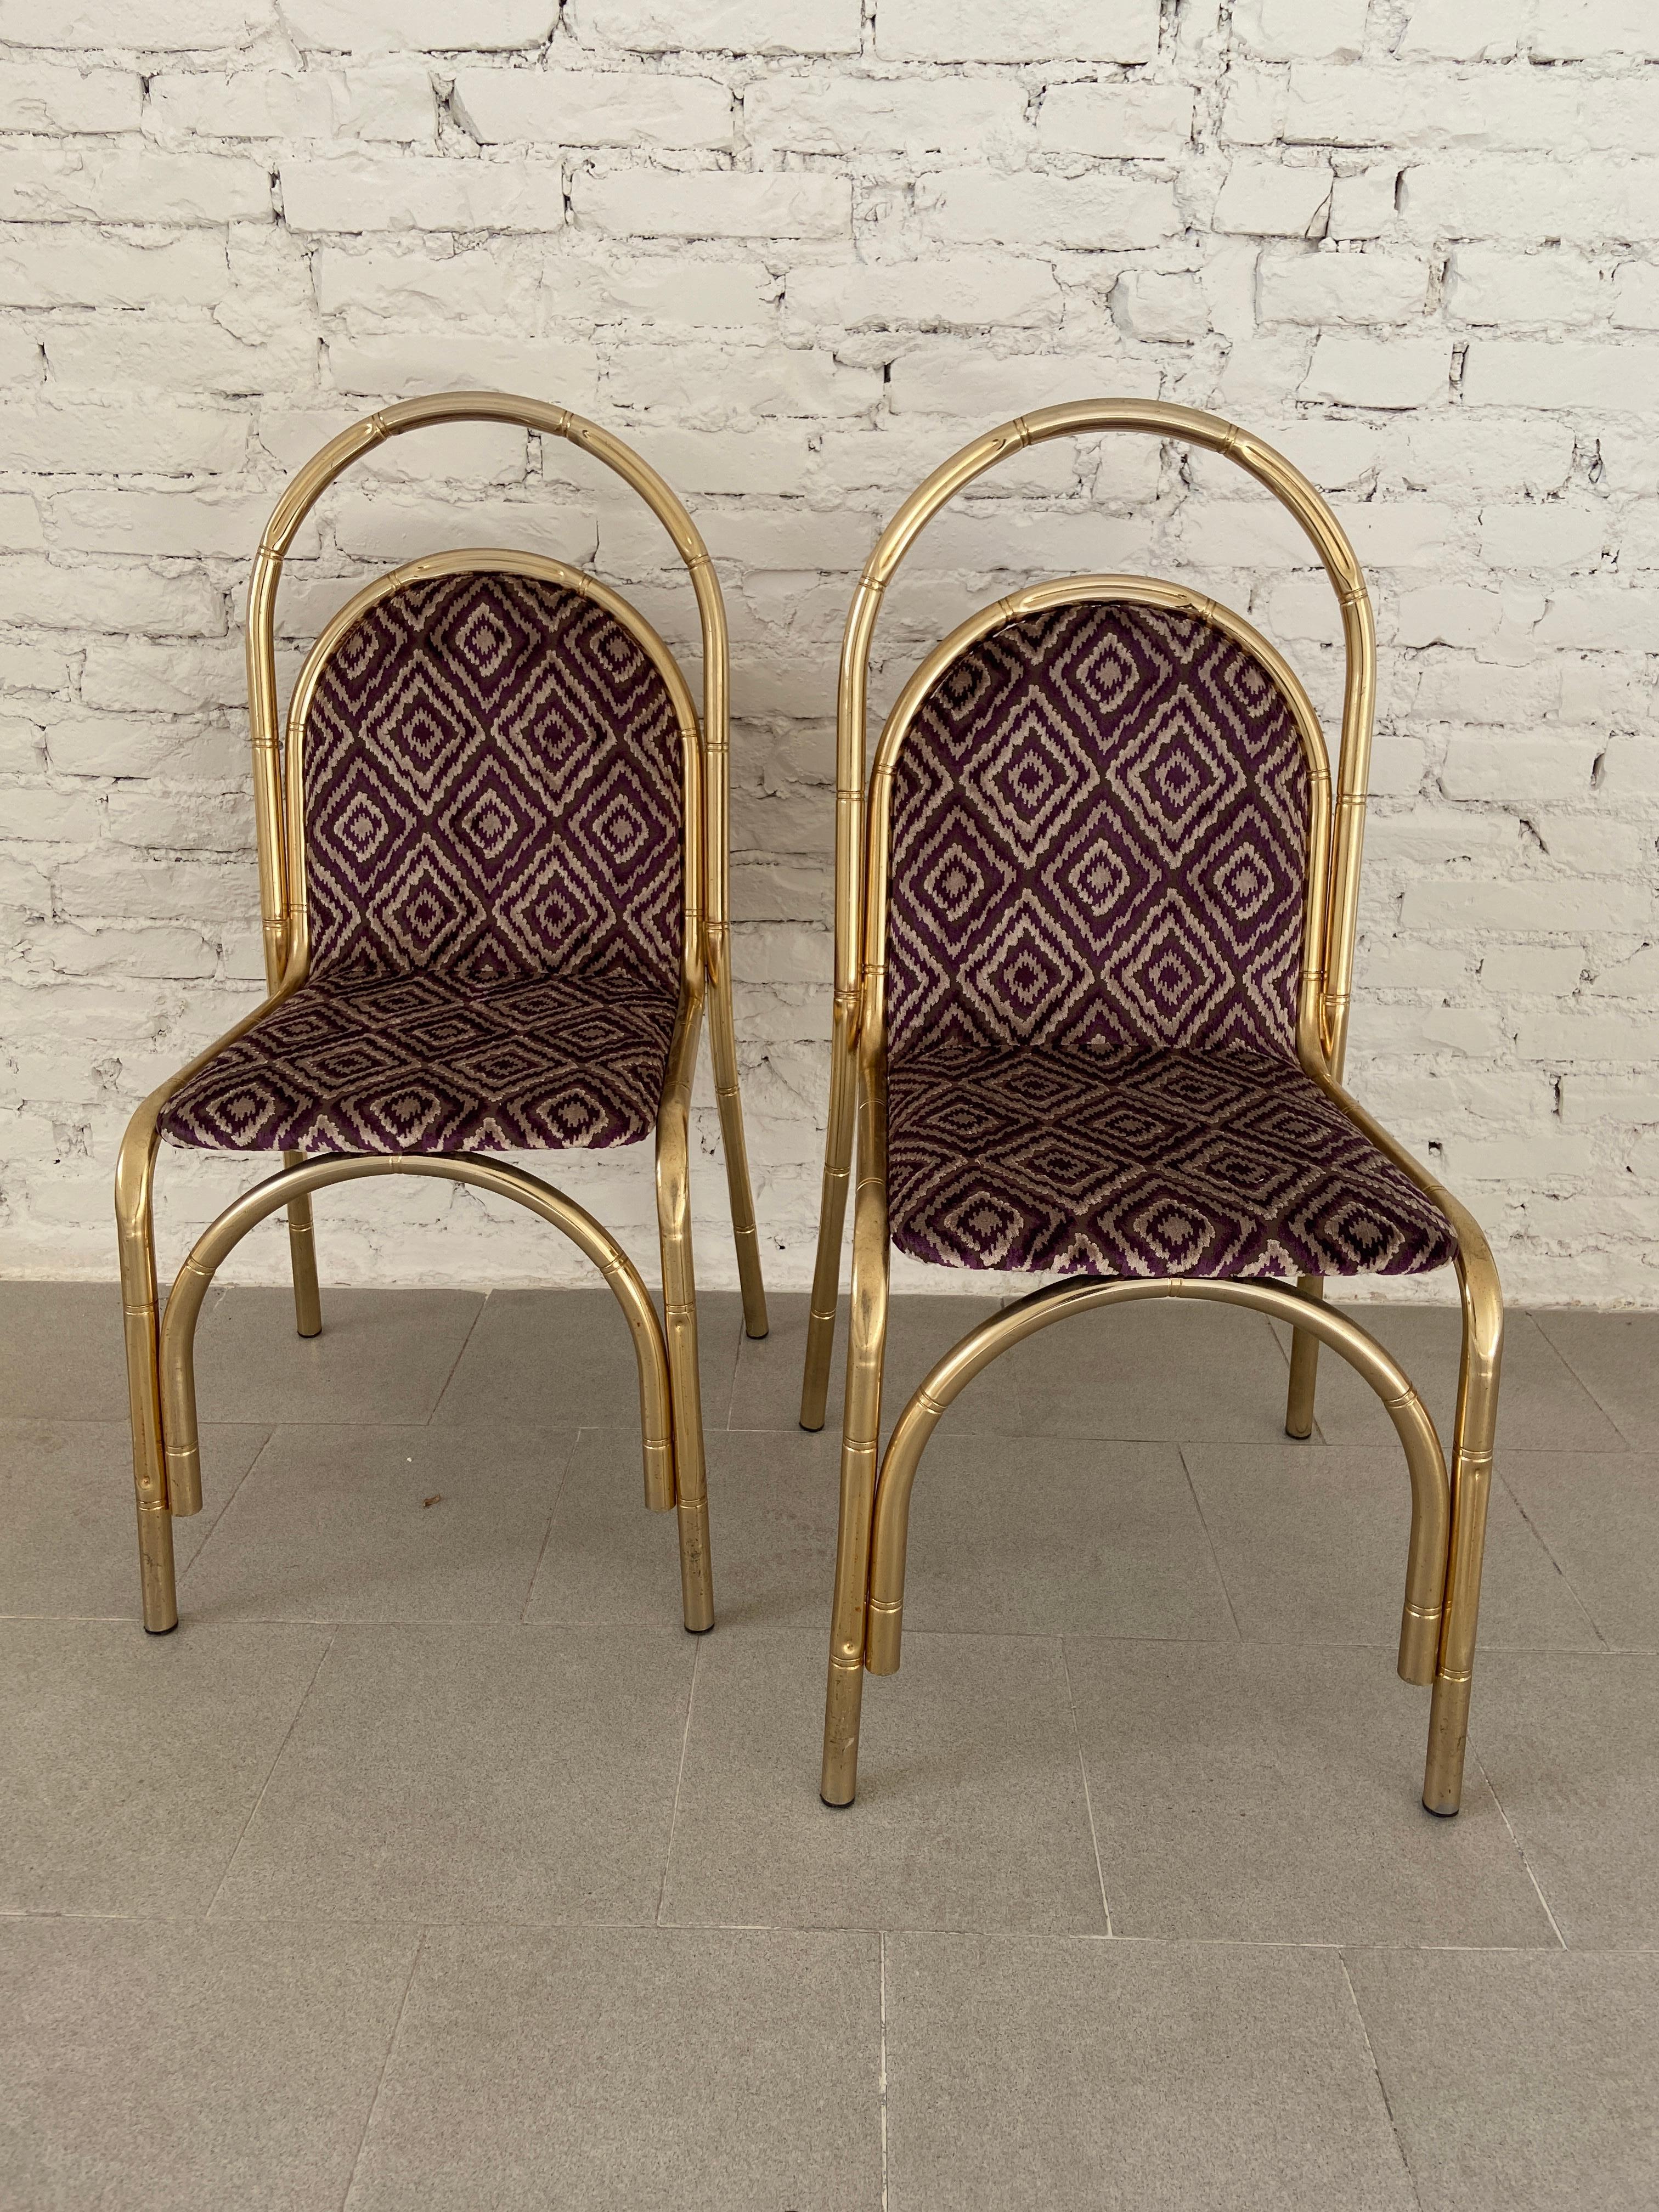 Late 20th Century Mid-Century Modern Italian Pair of Gilt Metal Faux Bamboo Chairs, 1970s For Sale